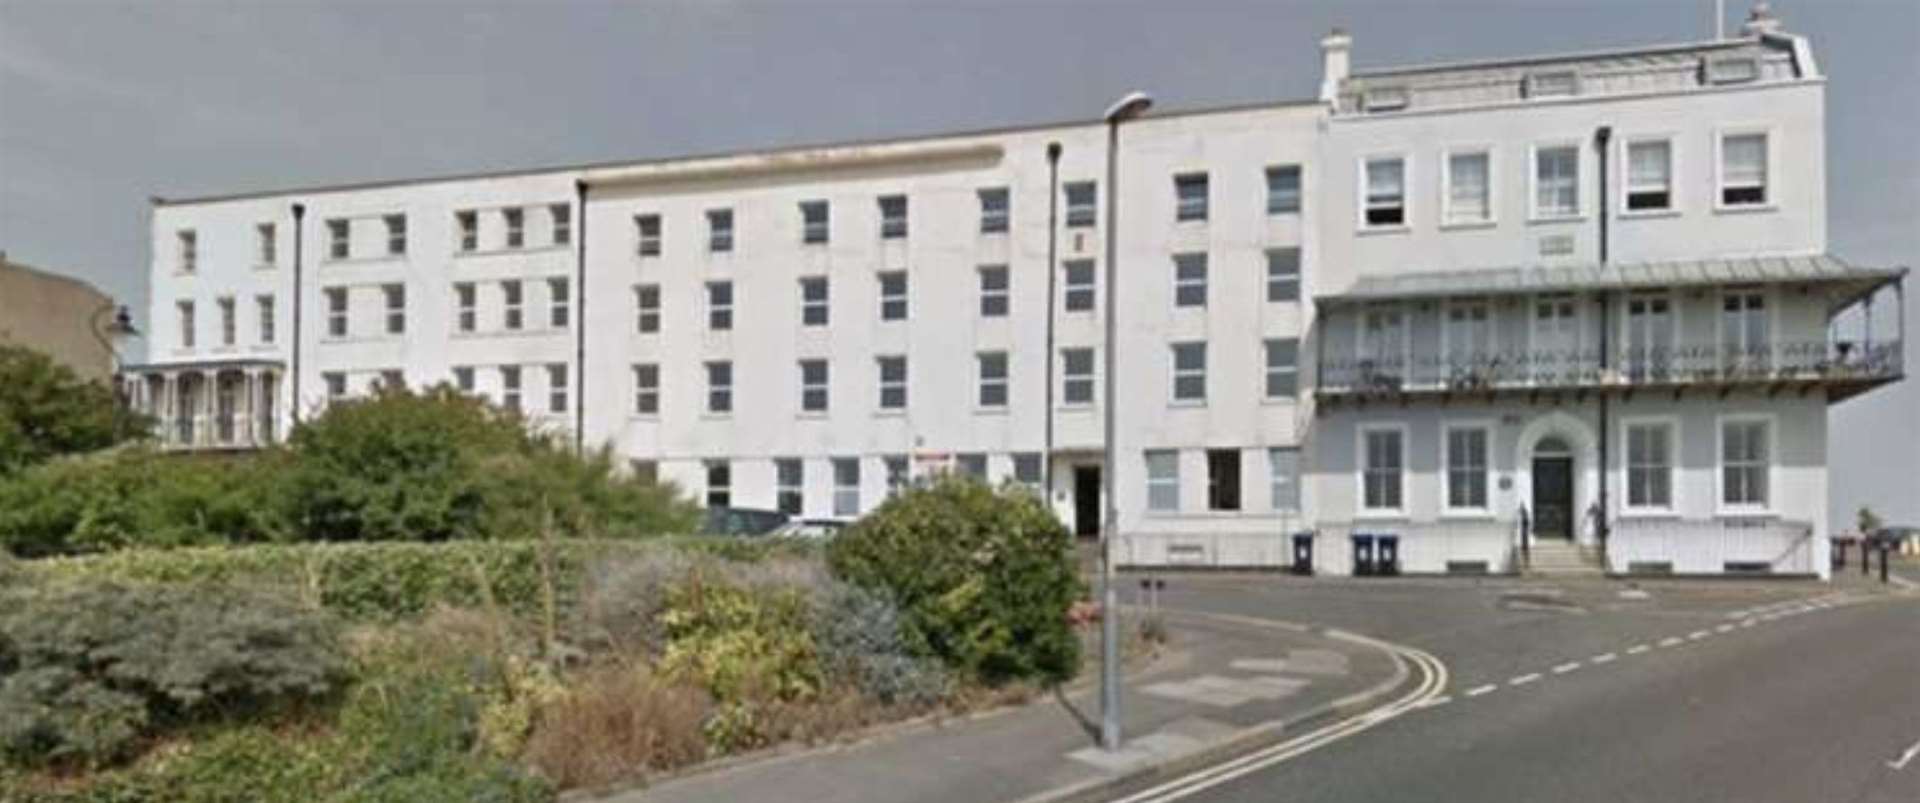 Dundee House, Ramsgate, was once owned by Thanet District Council